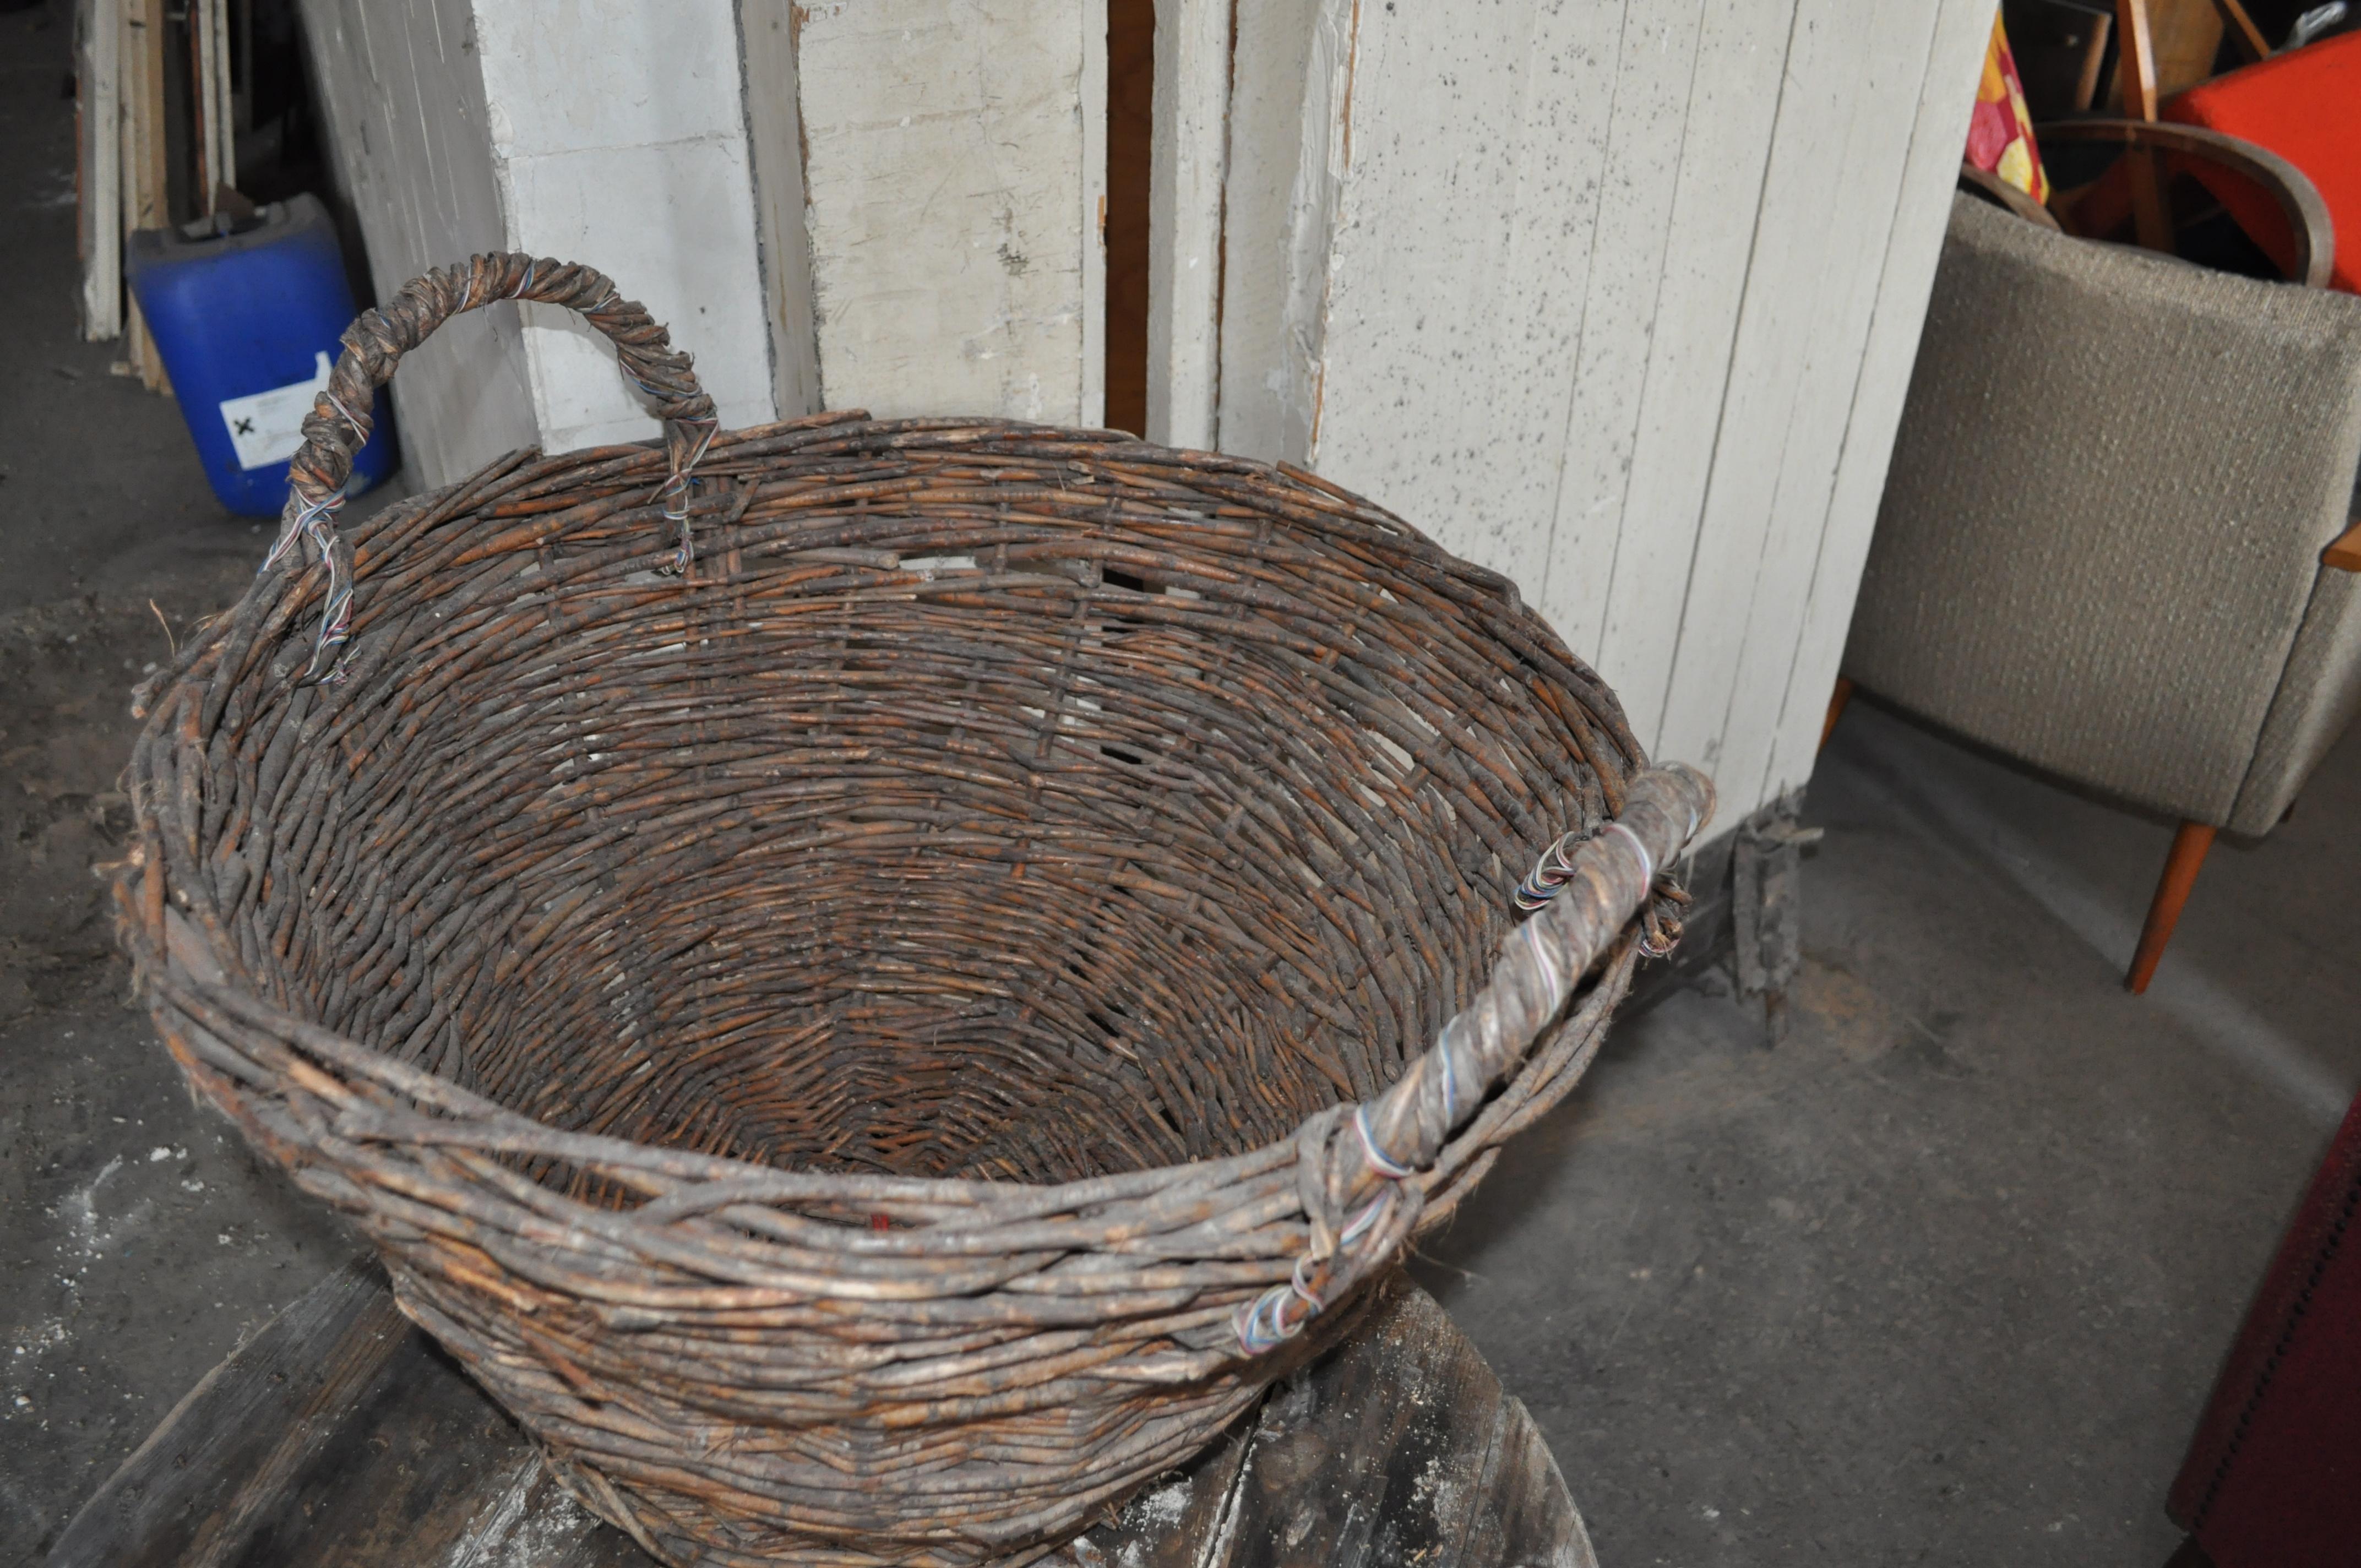 Vintage Basket with Handles from Hungary, circa 1940s (Ungarisch) im Angebot